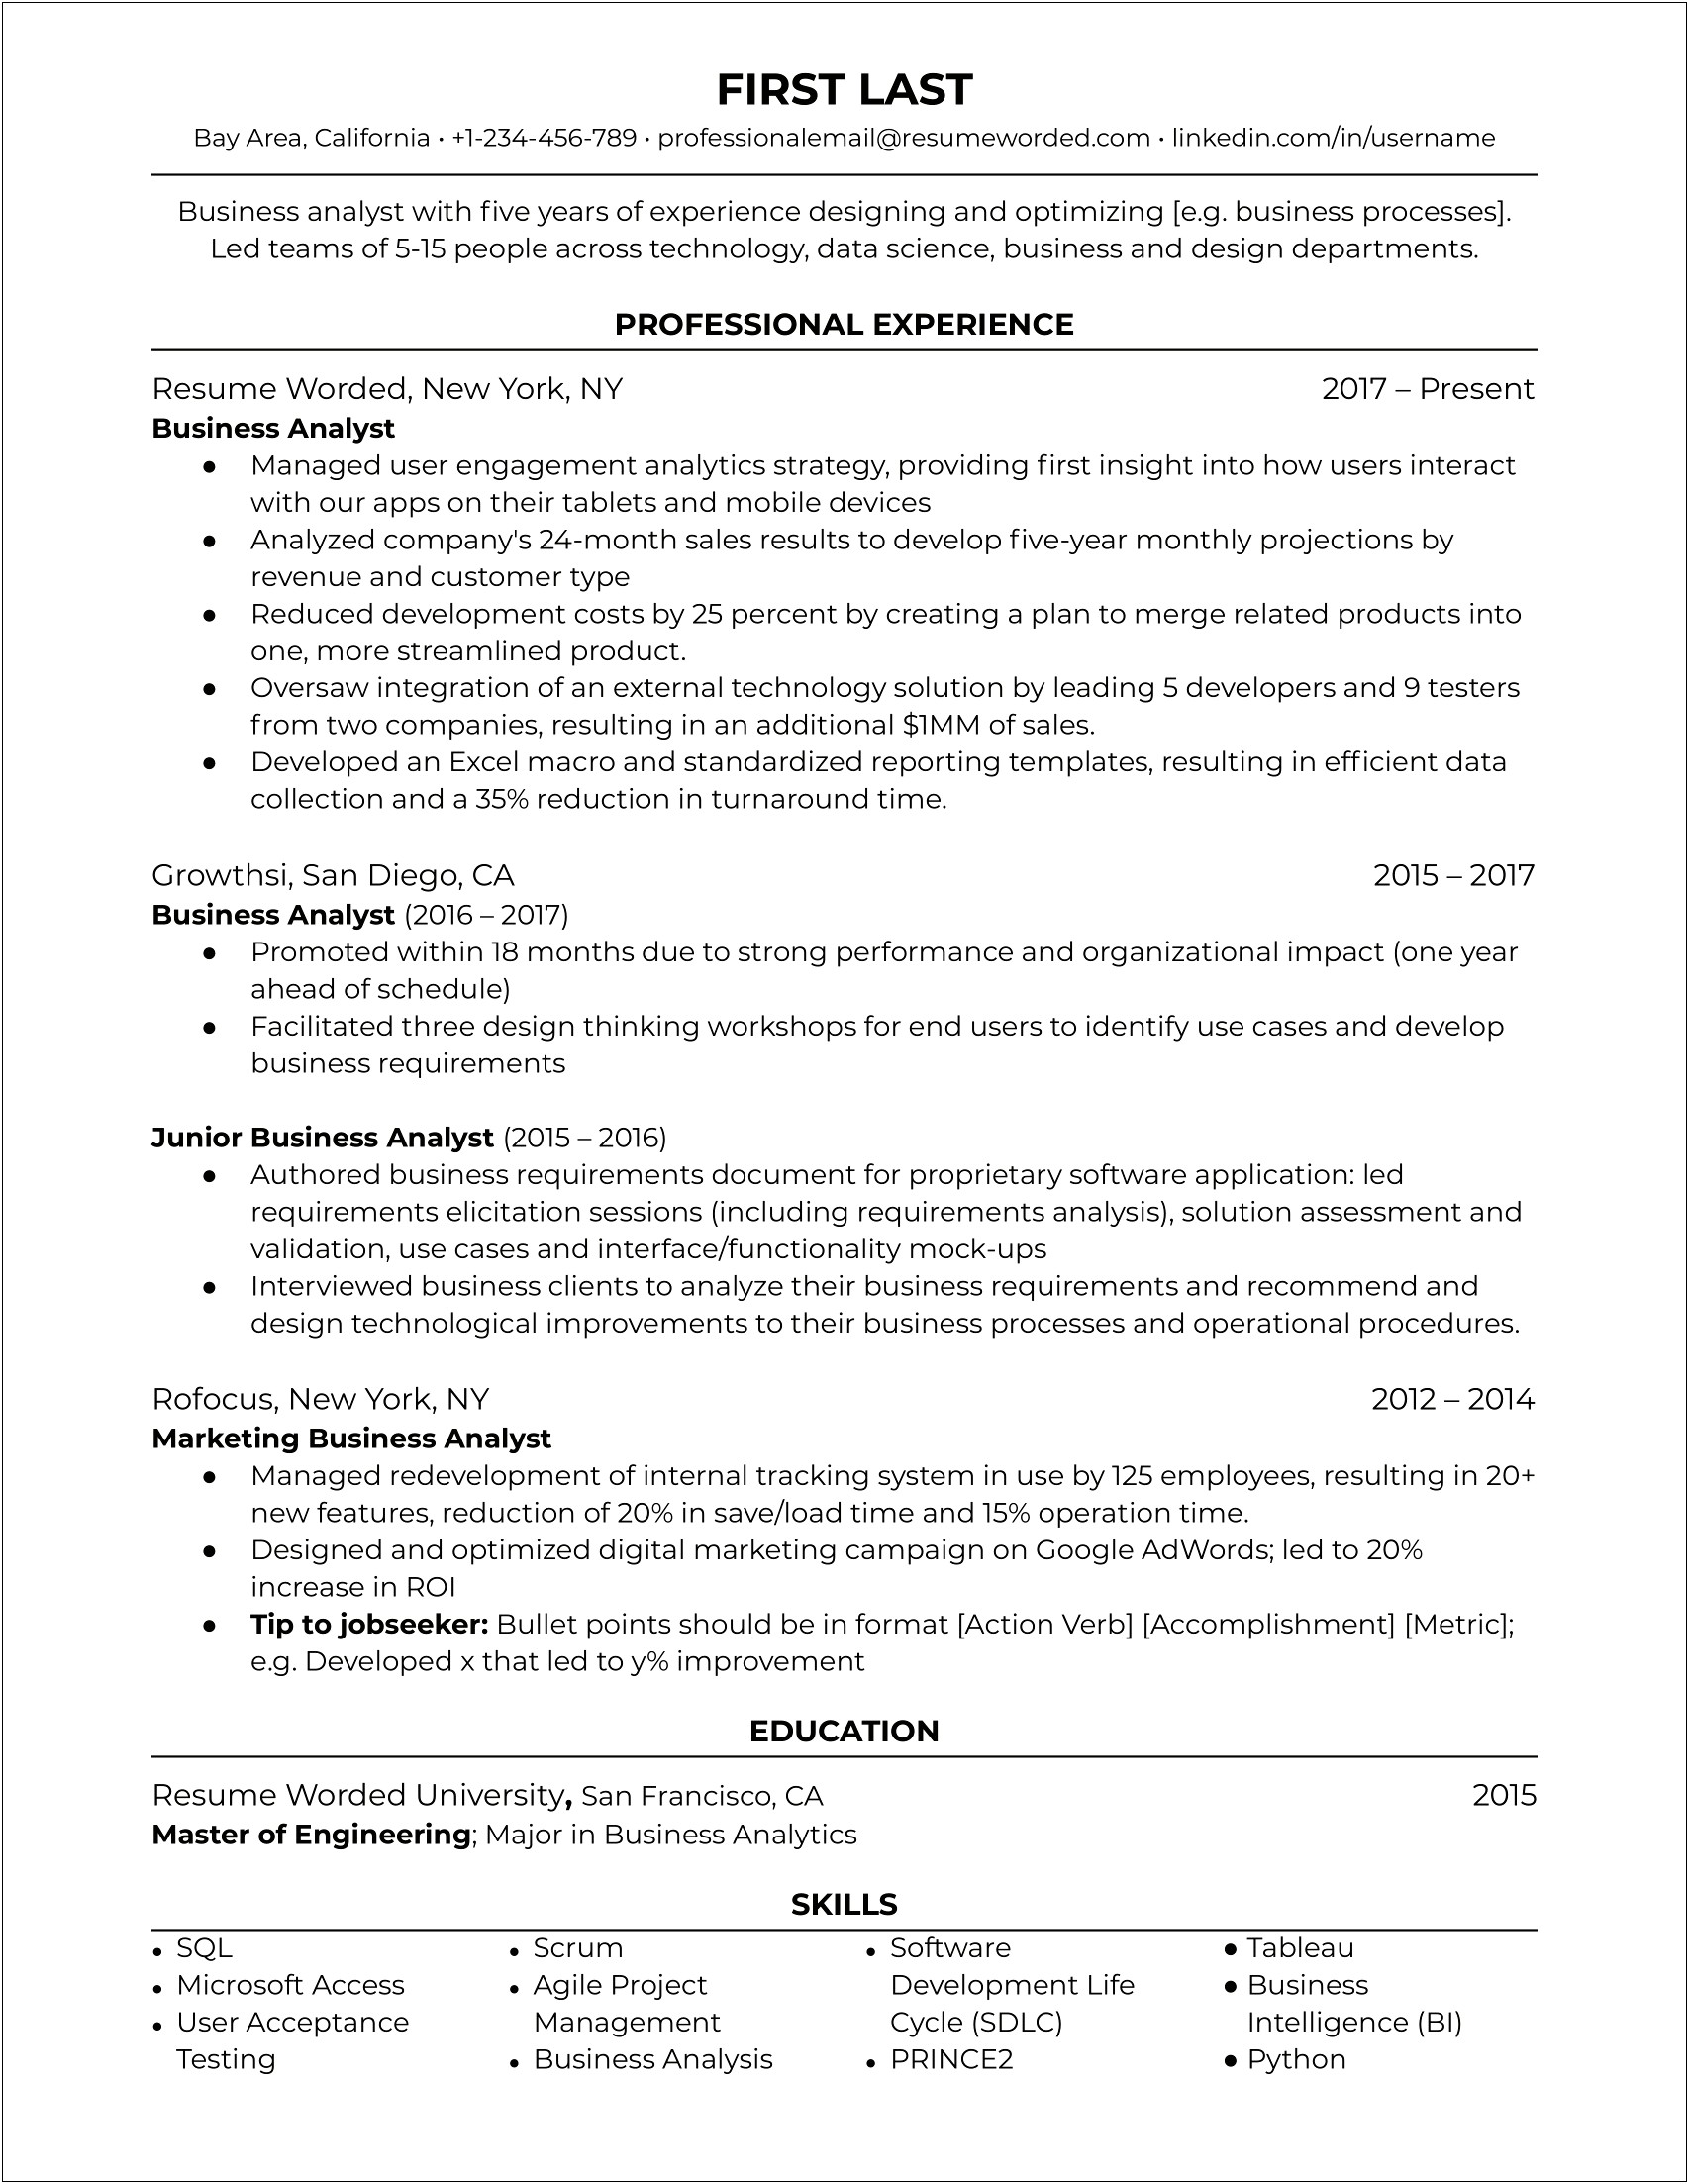 Business Analyst Resume Free Download